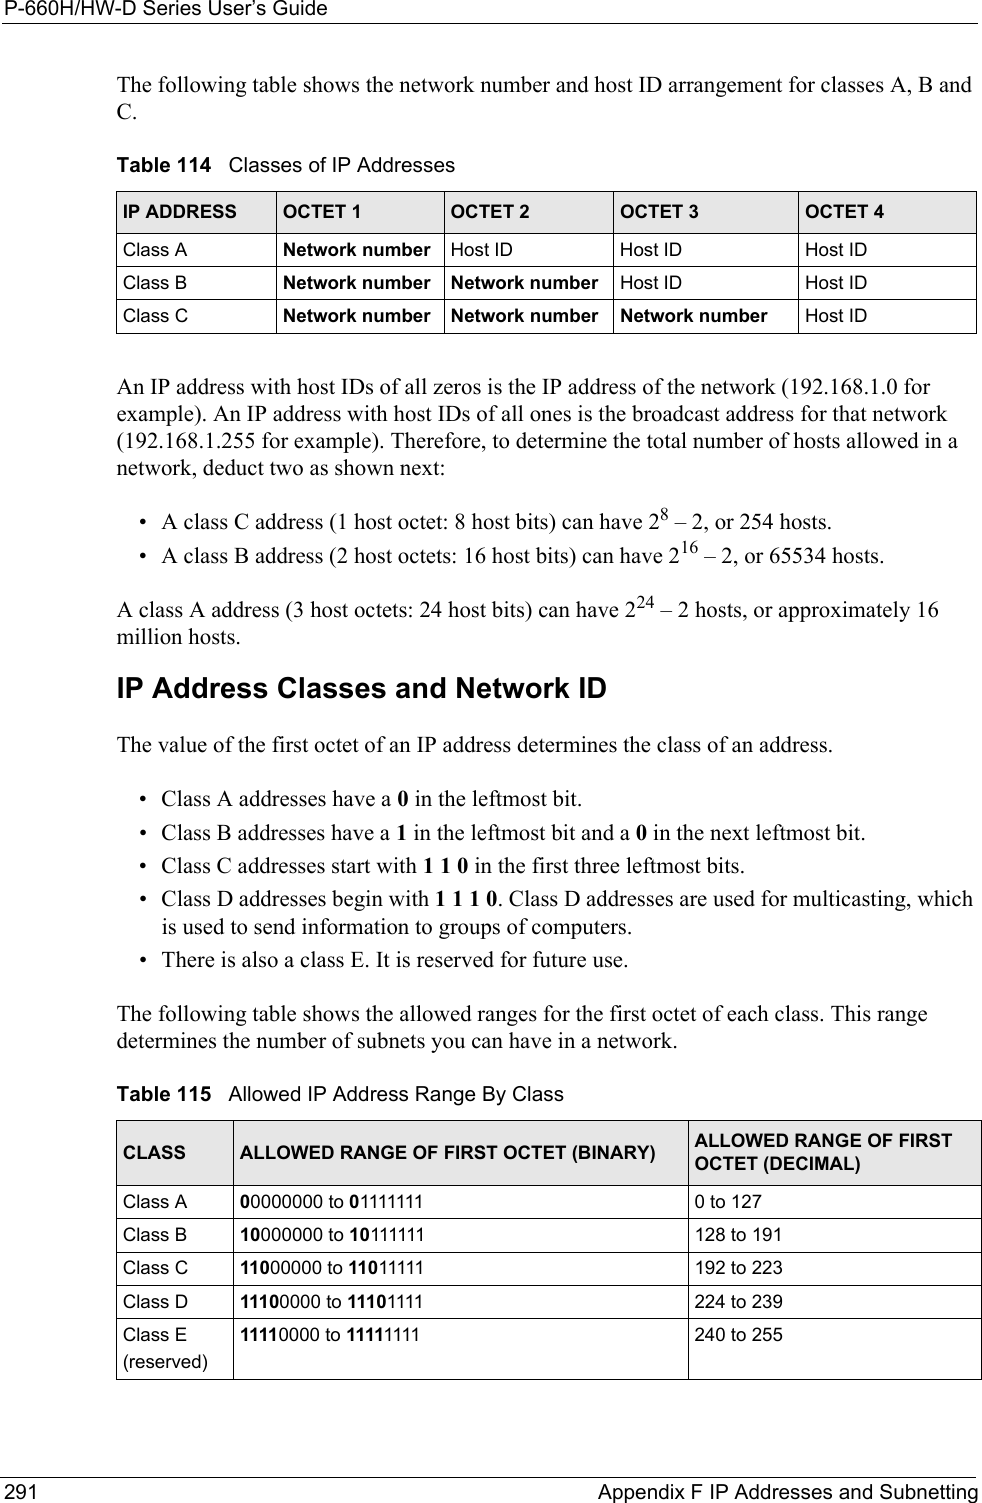 P-660H/HW-D Series User’s Guide291 Appendix F IP Addresses and SubnettingThe following table shows the network number and host ID arrangement for classes A, B and C.An IP address with host IDs of all zeros is the IP address of the network (192.168.1.0 for example). An IP address with host IDs of all ones is the broadcast address for that network  (192.168.1.255 for example). Therefore, to determine the total number of hosts allowed in a network, deduct two as shown next:• A class C address (1 host octet: 8 host bits) can have 28 – 2, or 254 hosts. • A class B address (2 host octets: 16 host bits) can have 216 – 2, or 65534 hosts. A class A address (3 host octets: 24 host bits) can have 224 – 2 hosts, or approximately 16 million hosts. IP Address Classes and Network IDThe value of the first octet of an IP address determines the class of an address. • Class A addresses have a 0 in the leftmost bit. • Class B addresses have a 1 in the leftmost bit and a 0 in the next leftmost bit. • Class C addresses start with 1 1 0 in the first three leftmost bits. • Class D addresses begin with 1 1 1 0. Class D addresses are used for multicasting, which is used to send information to groups of computers.• There is also a class E. It is reserved for future use.The following table shows the allowed ranges for the first octet of each class. This range determines the number of subnets you can have in a network.Table 114   Classes of IP AddressesIP ADDRESS OCTET 1 OCTET 2 OCTET 3 OCTET 4Class A Network number Host ID Host ID Host IDClass B Network number Network number Host ID Host IDClass C Network number Network number Network number Host IDTable 115   Allowed IP Address Range By ClassCLASS ALLOWED RANGE OF FIRST OCTET (BINARY) ALLOWED RANGE OF FIRST OCTET (DECIMAL)Class A 00000000 to 01111111 0 to 127Class B 10000000 to 10111111 128 to 191Class C 11000000 to 11011111 192 to 223Class D 11100000 to 11101111 224 to 239Class E(reserved)11110000 to 11111111 240 to 255 